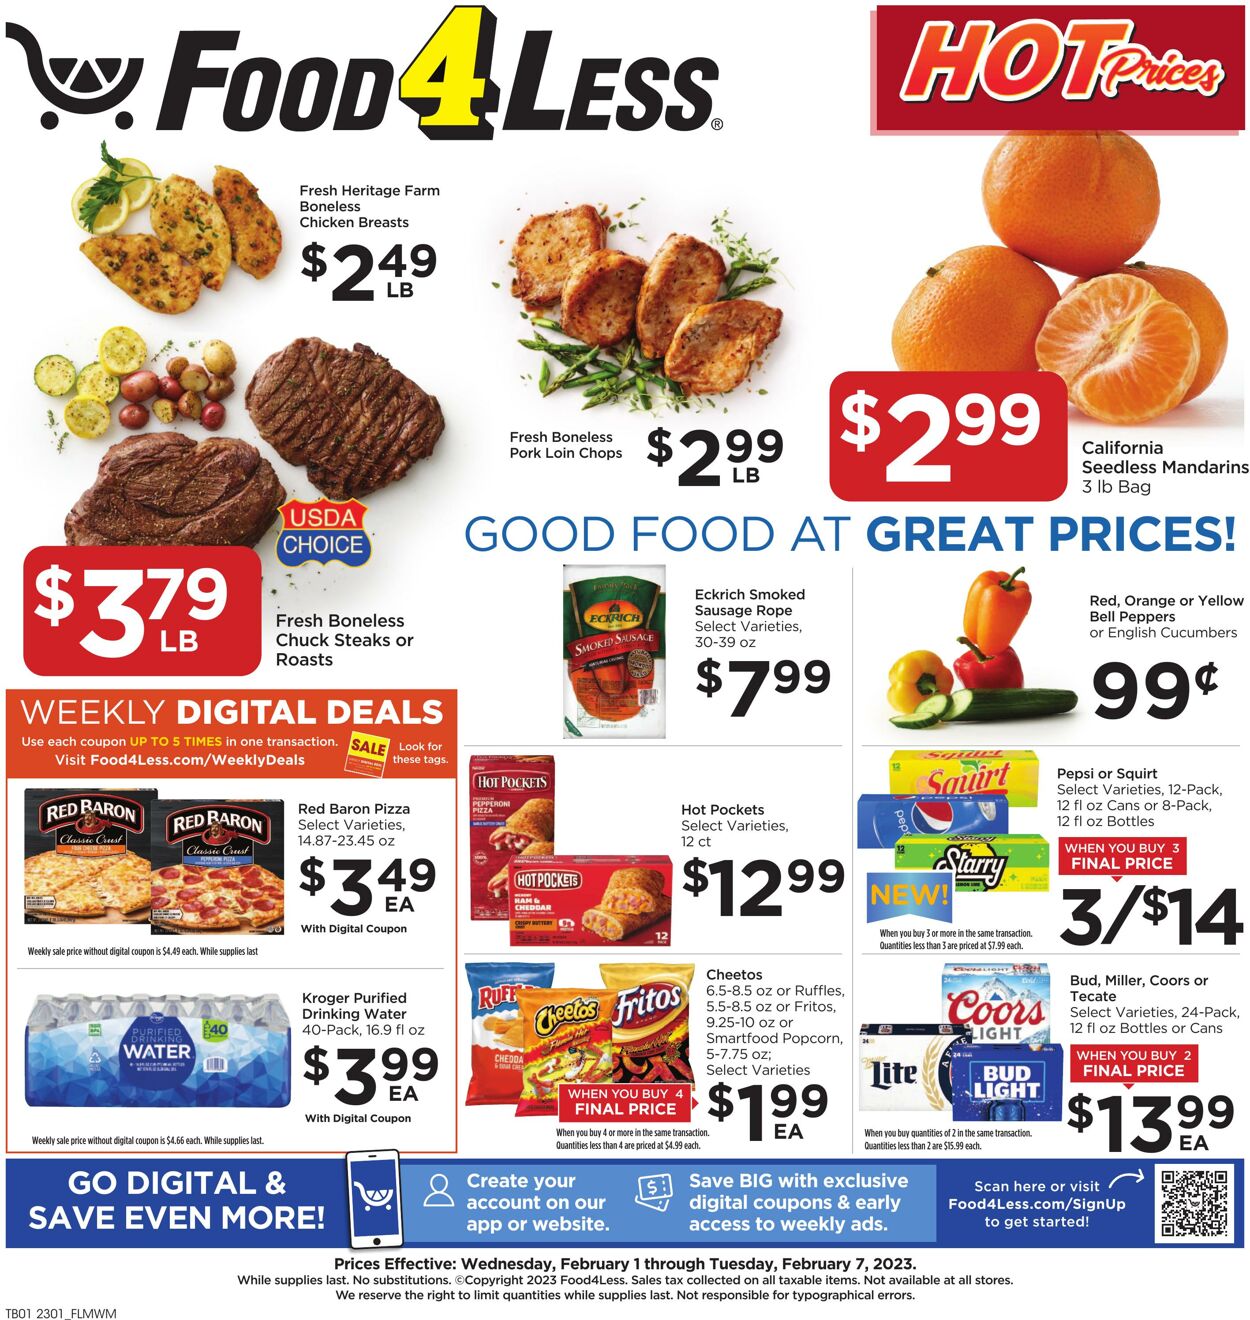 Food 4 Less Promotional weekly ads